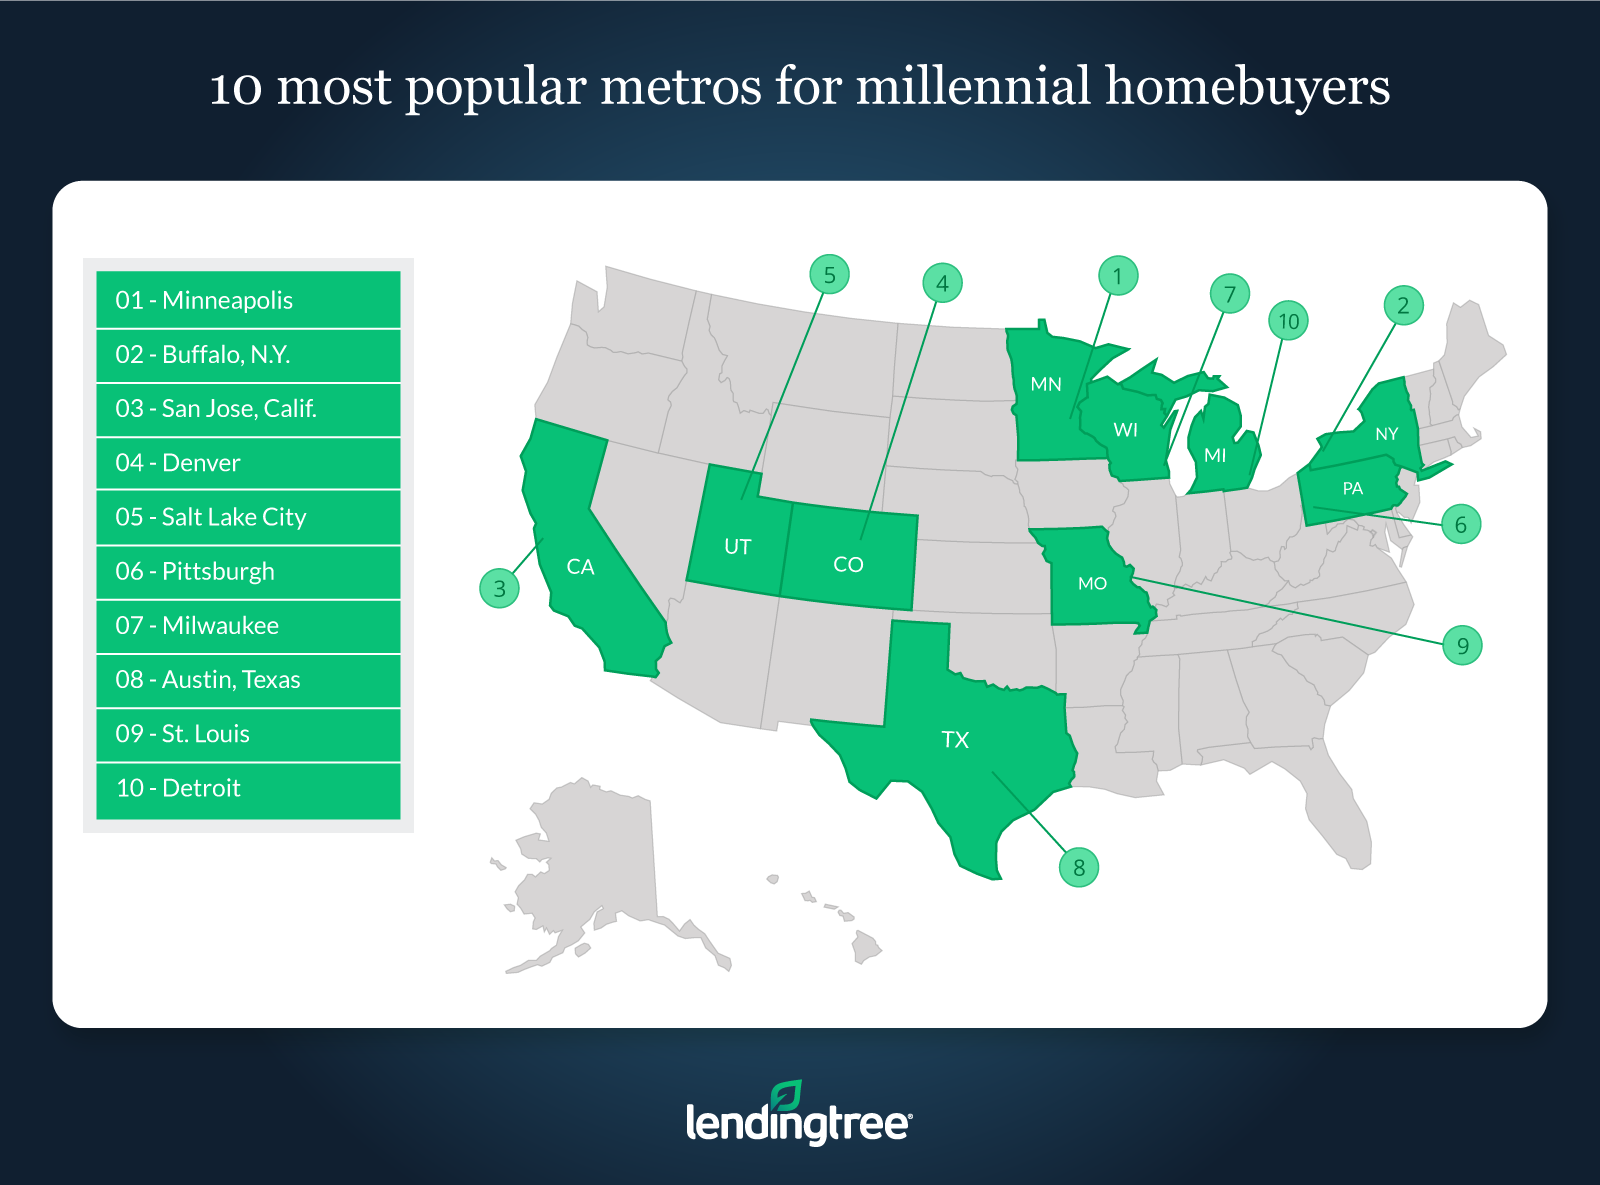 A new study from LendingTree of the nation’s 50 largest metro areas has determined Minneapolis is the most popular destination for Millennials in pursuit of homeownership